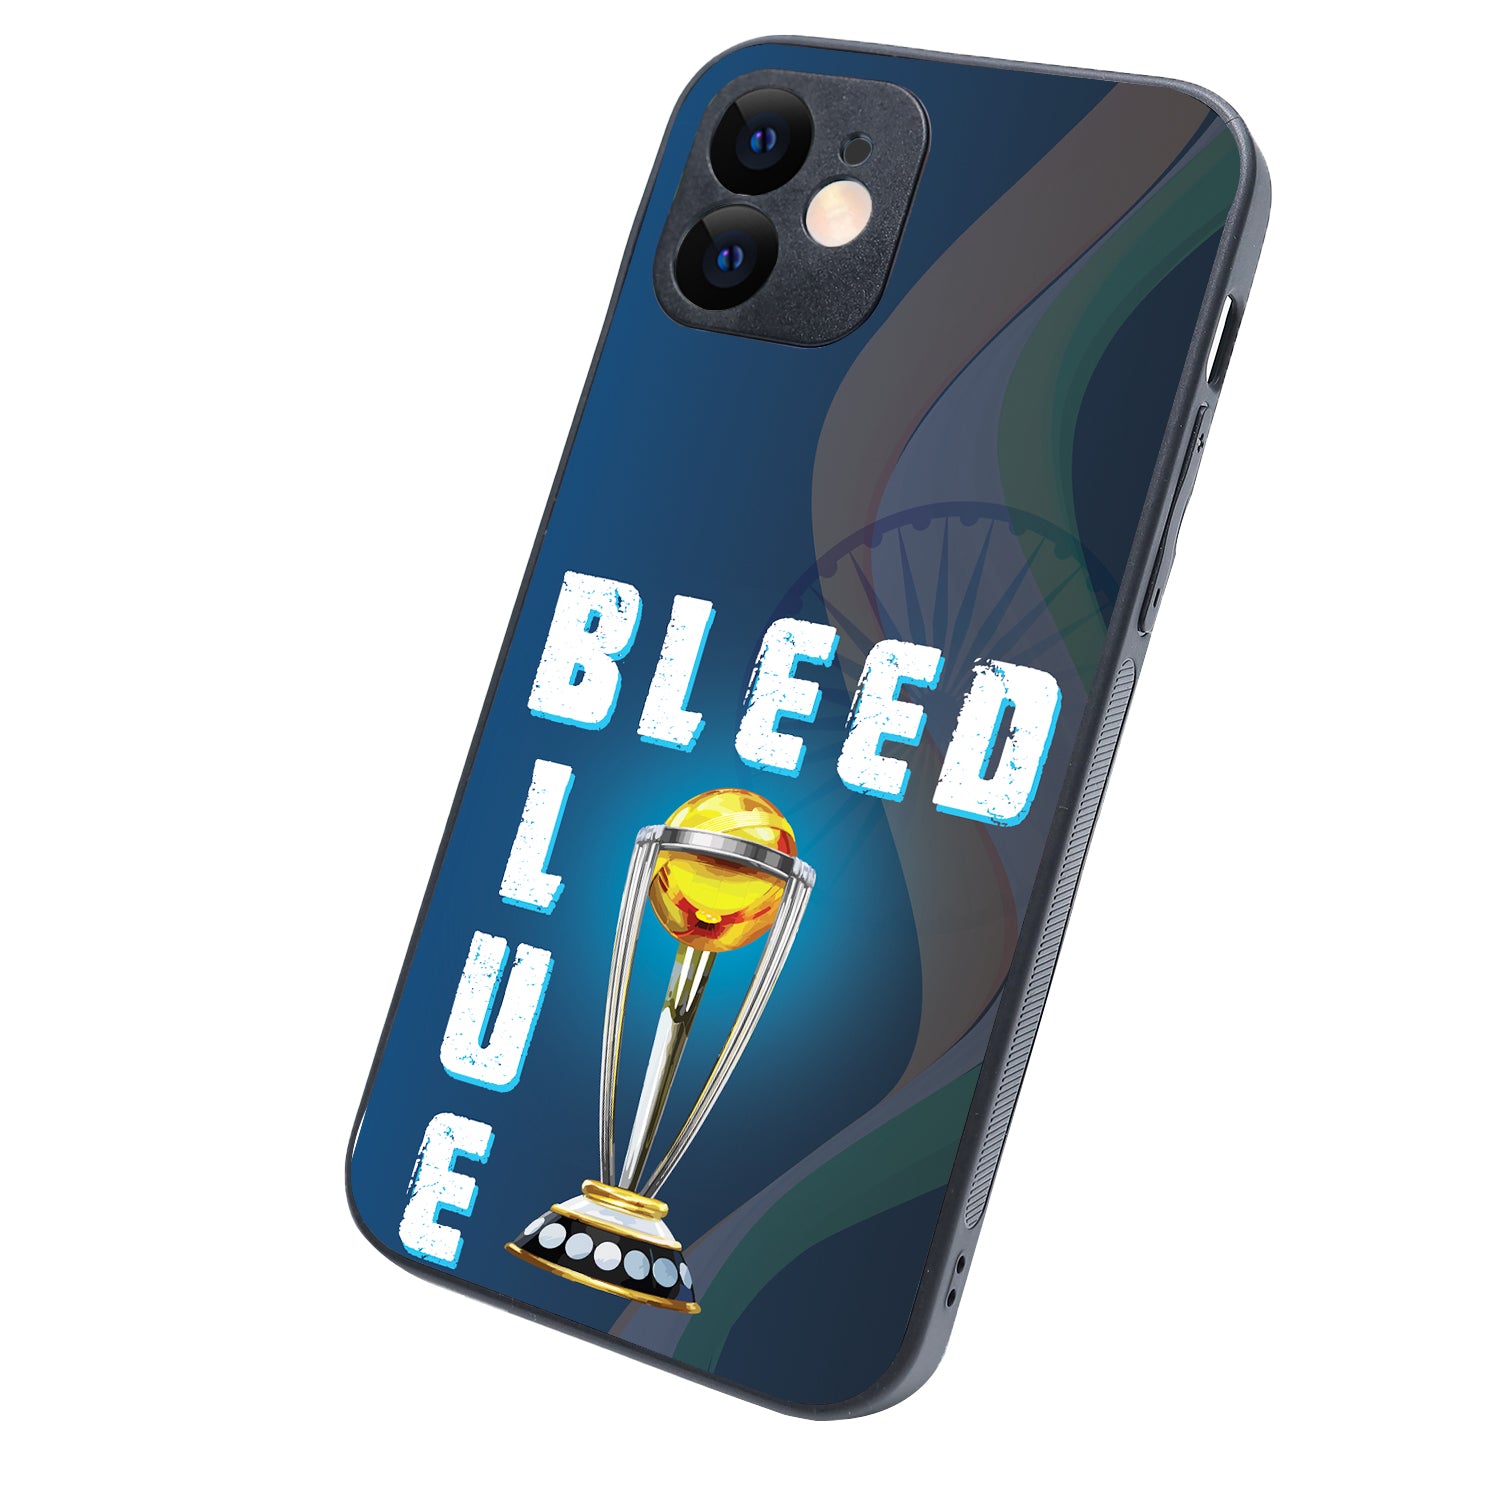 Bleed Blue Sports iPhone 12 Case